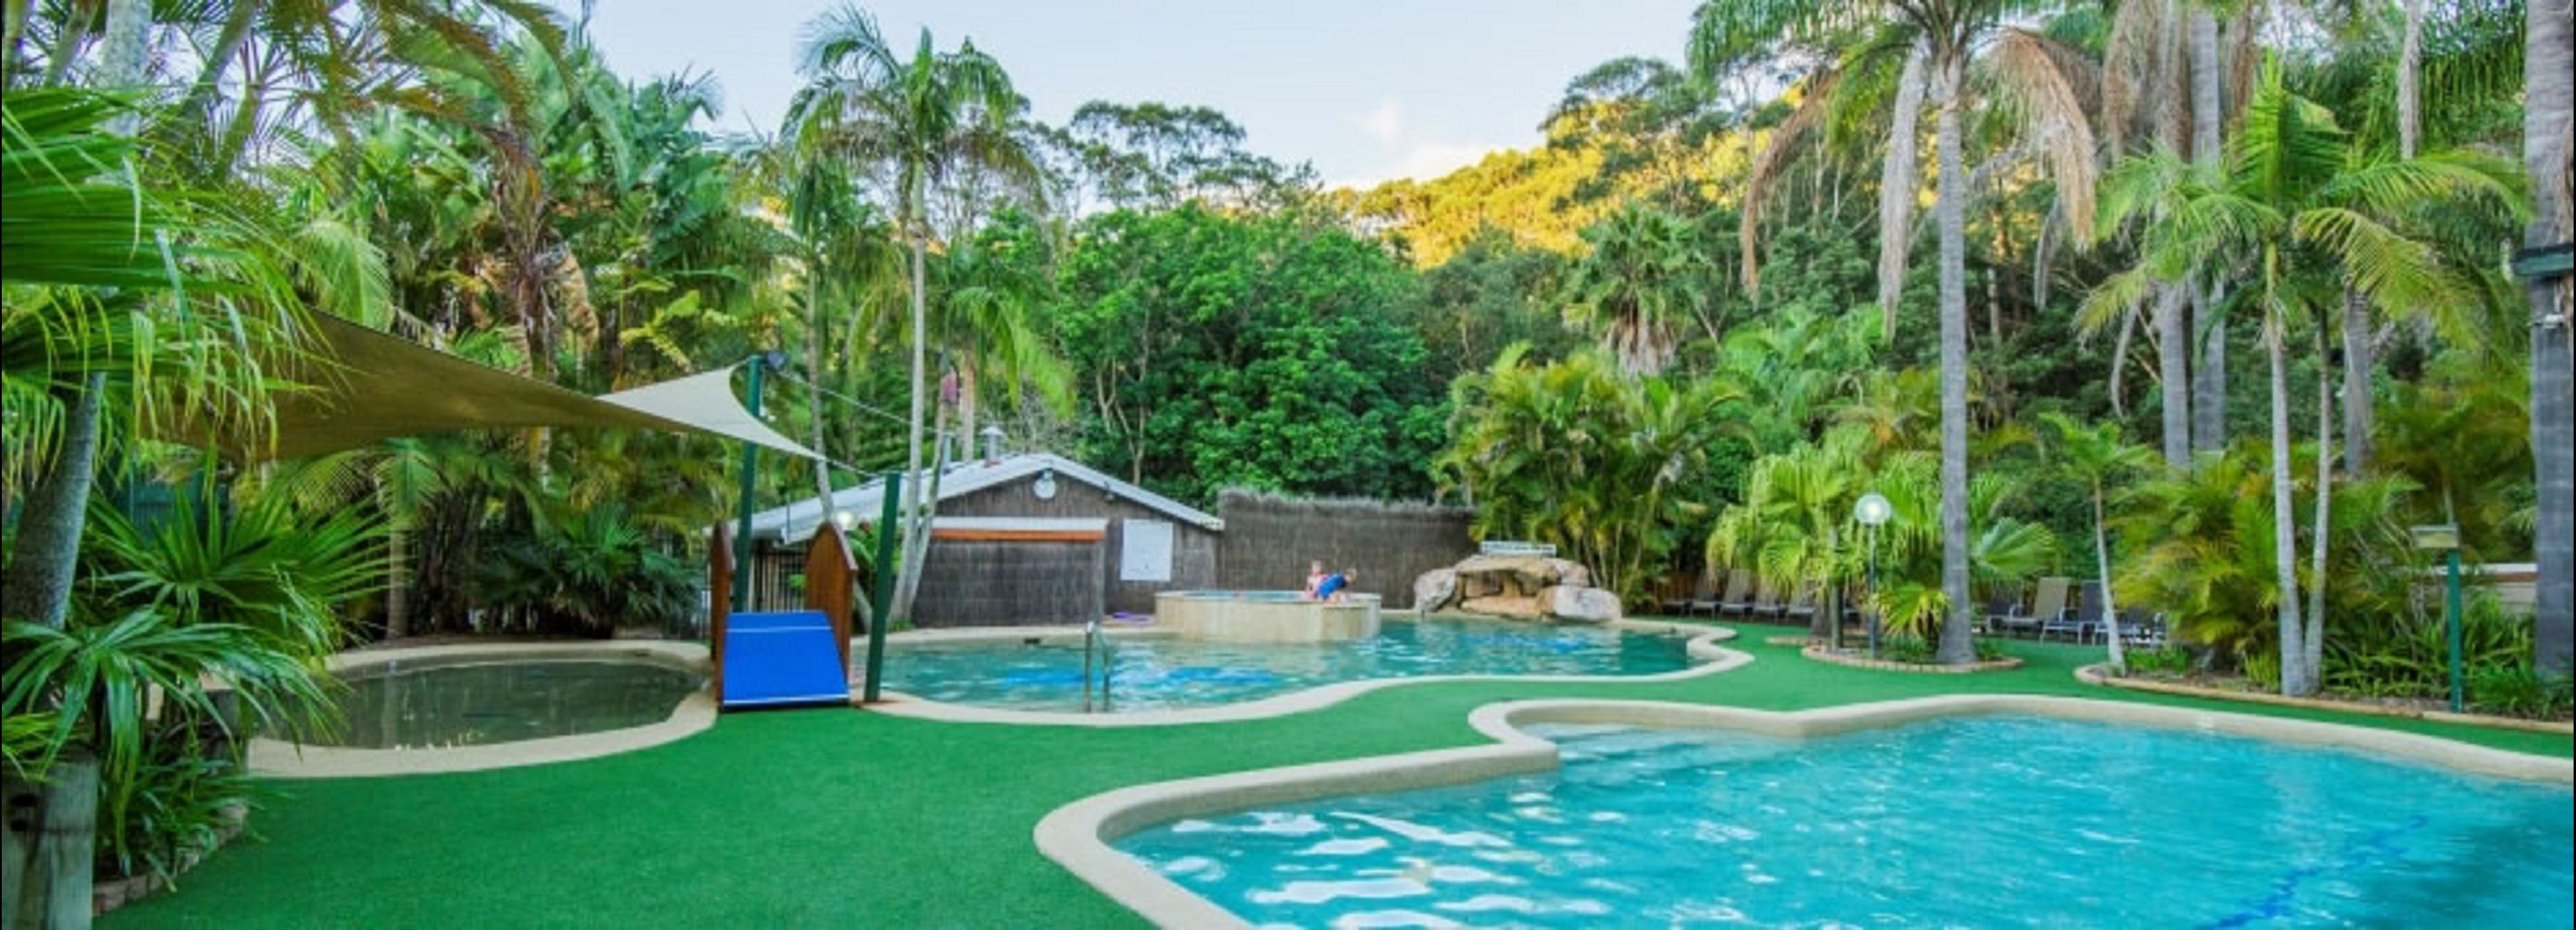 The Palms at Avoca - Accommodation Find